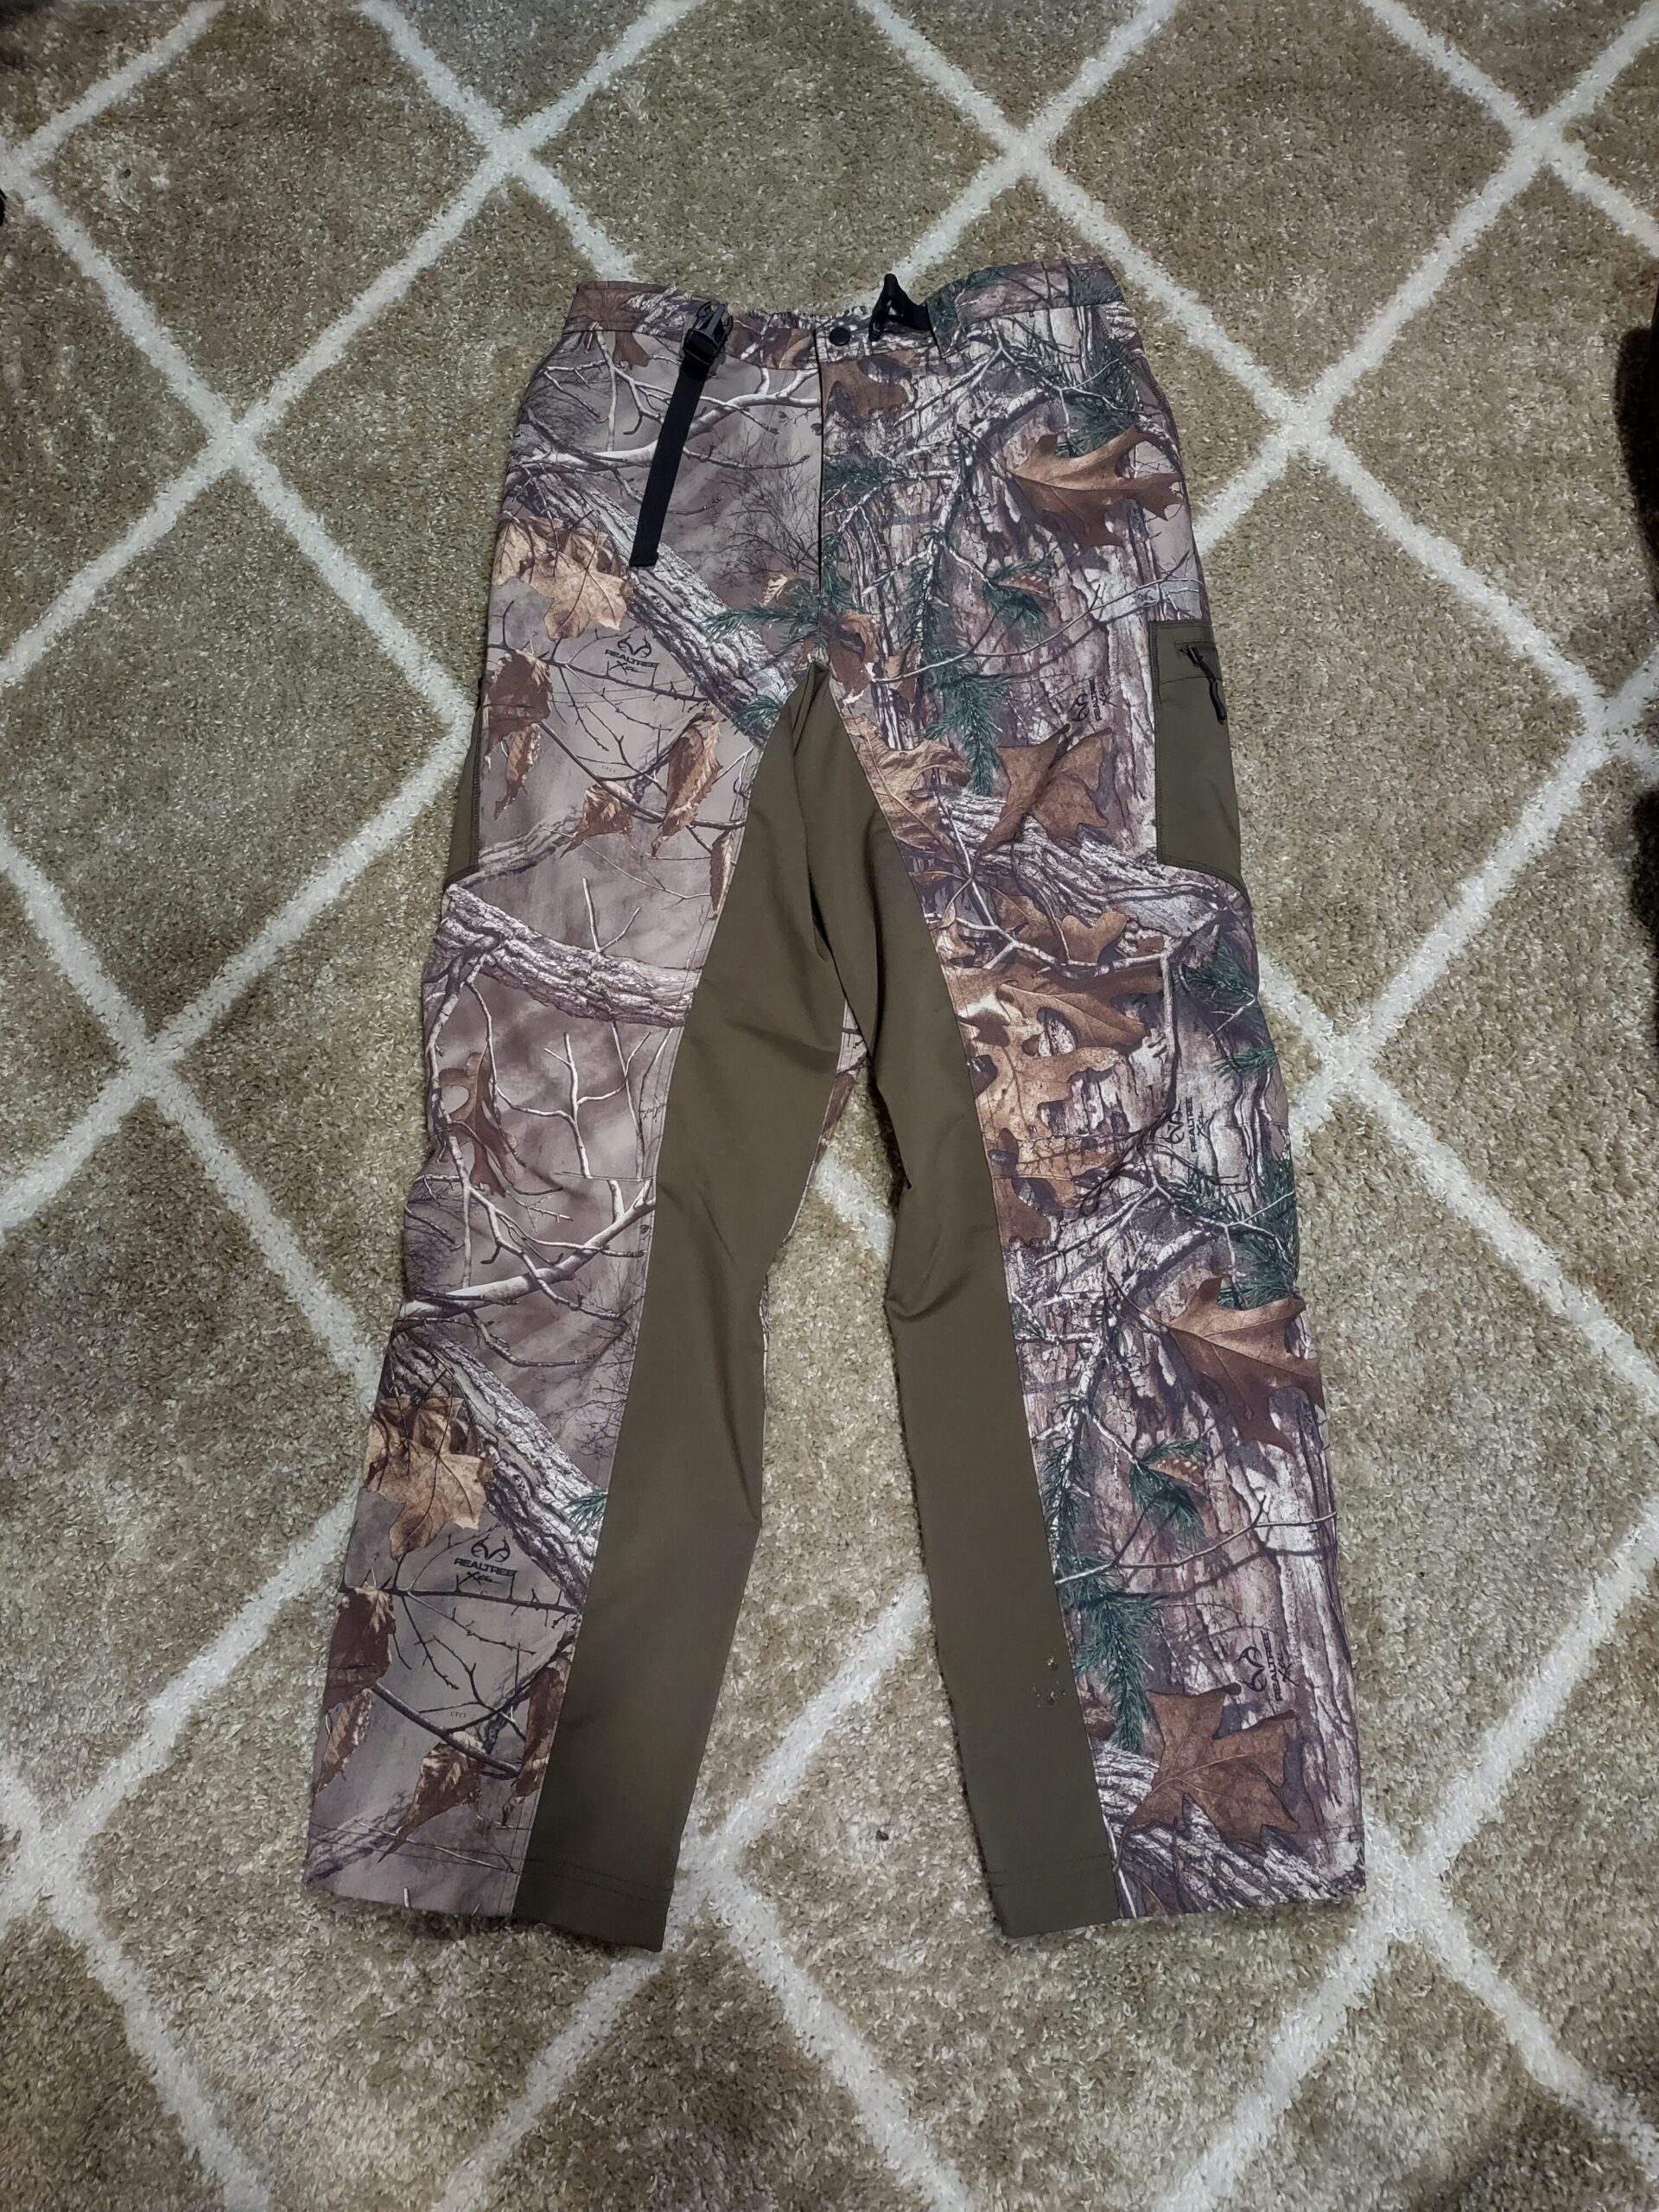 Gander mountain guide pants and windbreaker - Classified Ads ...